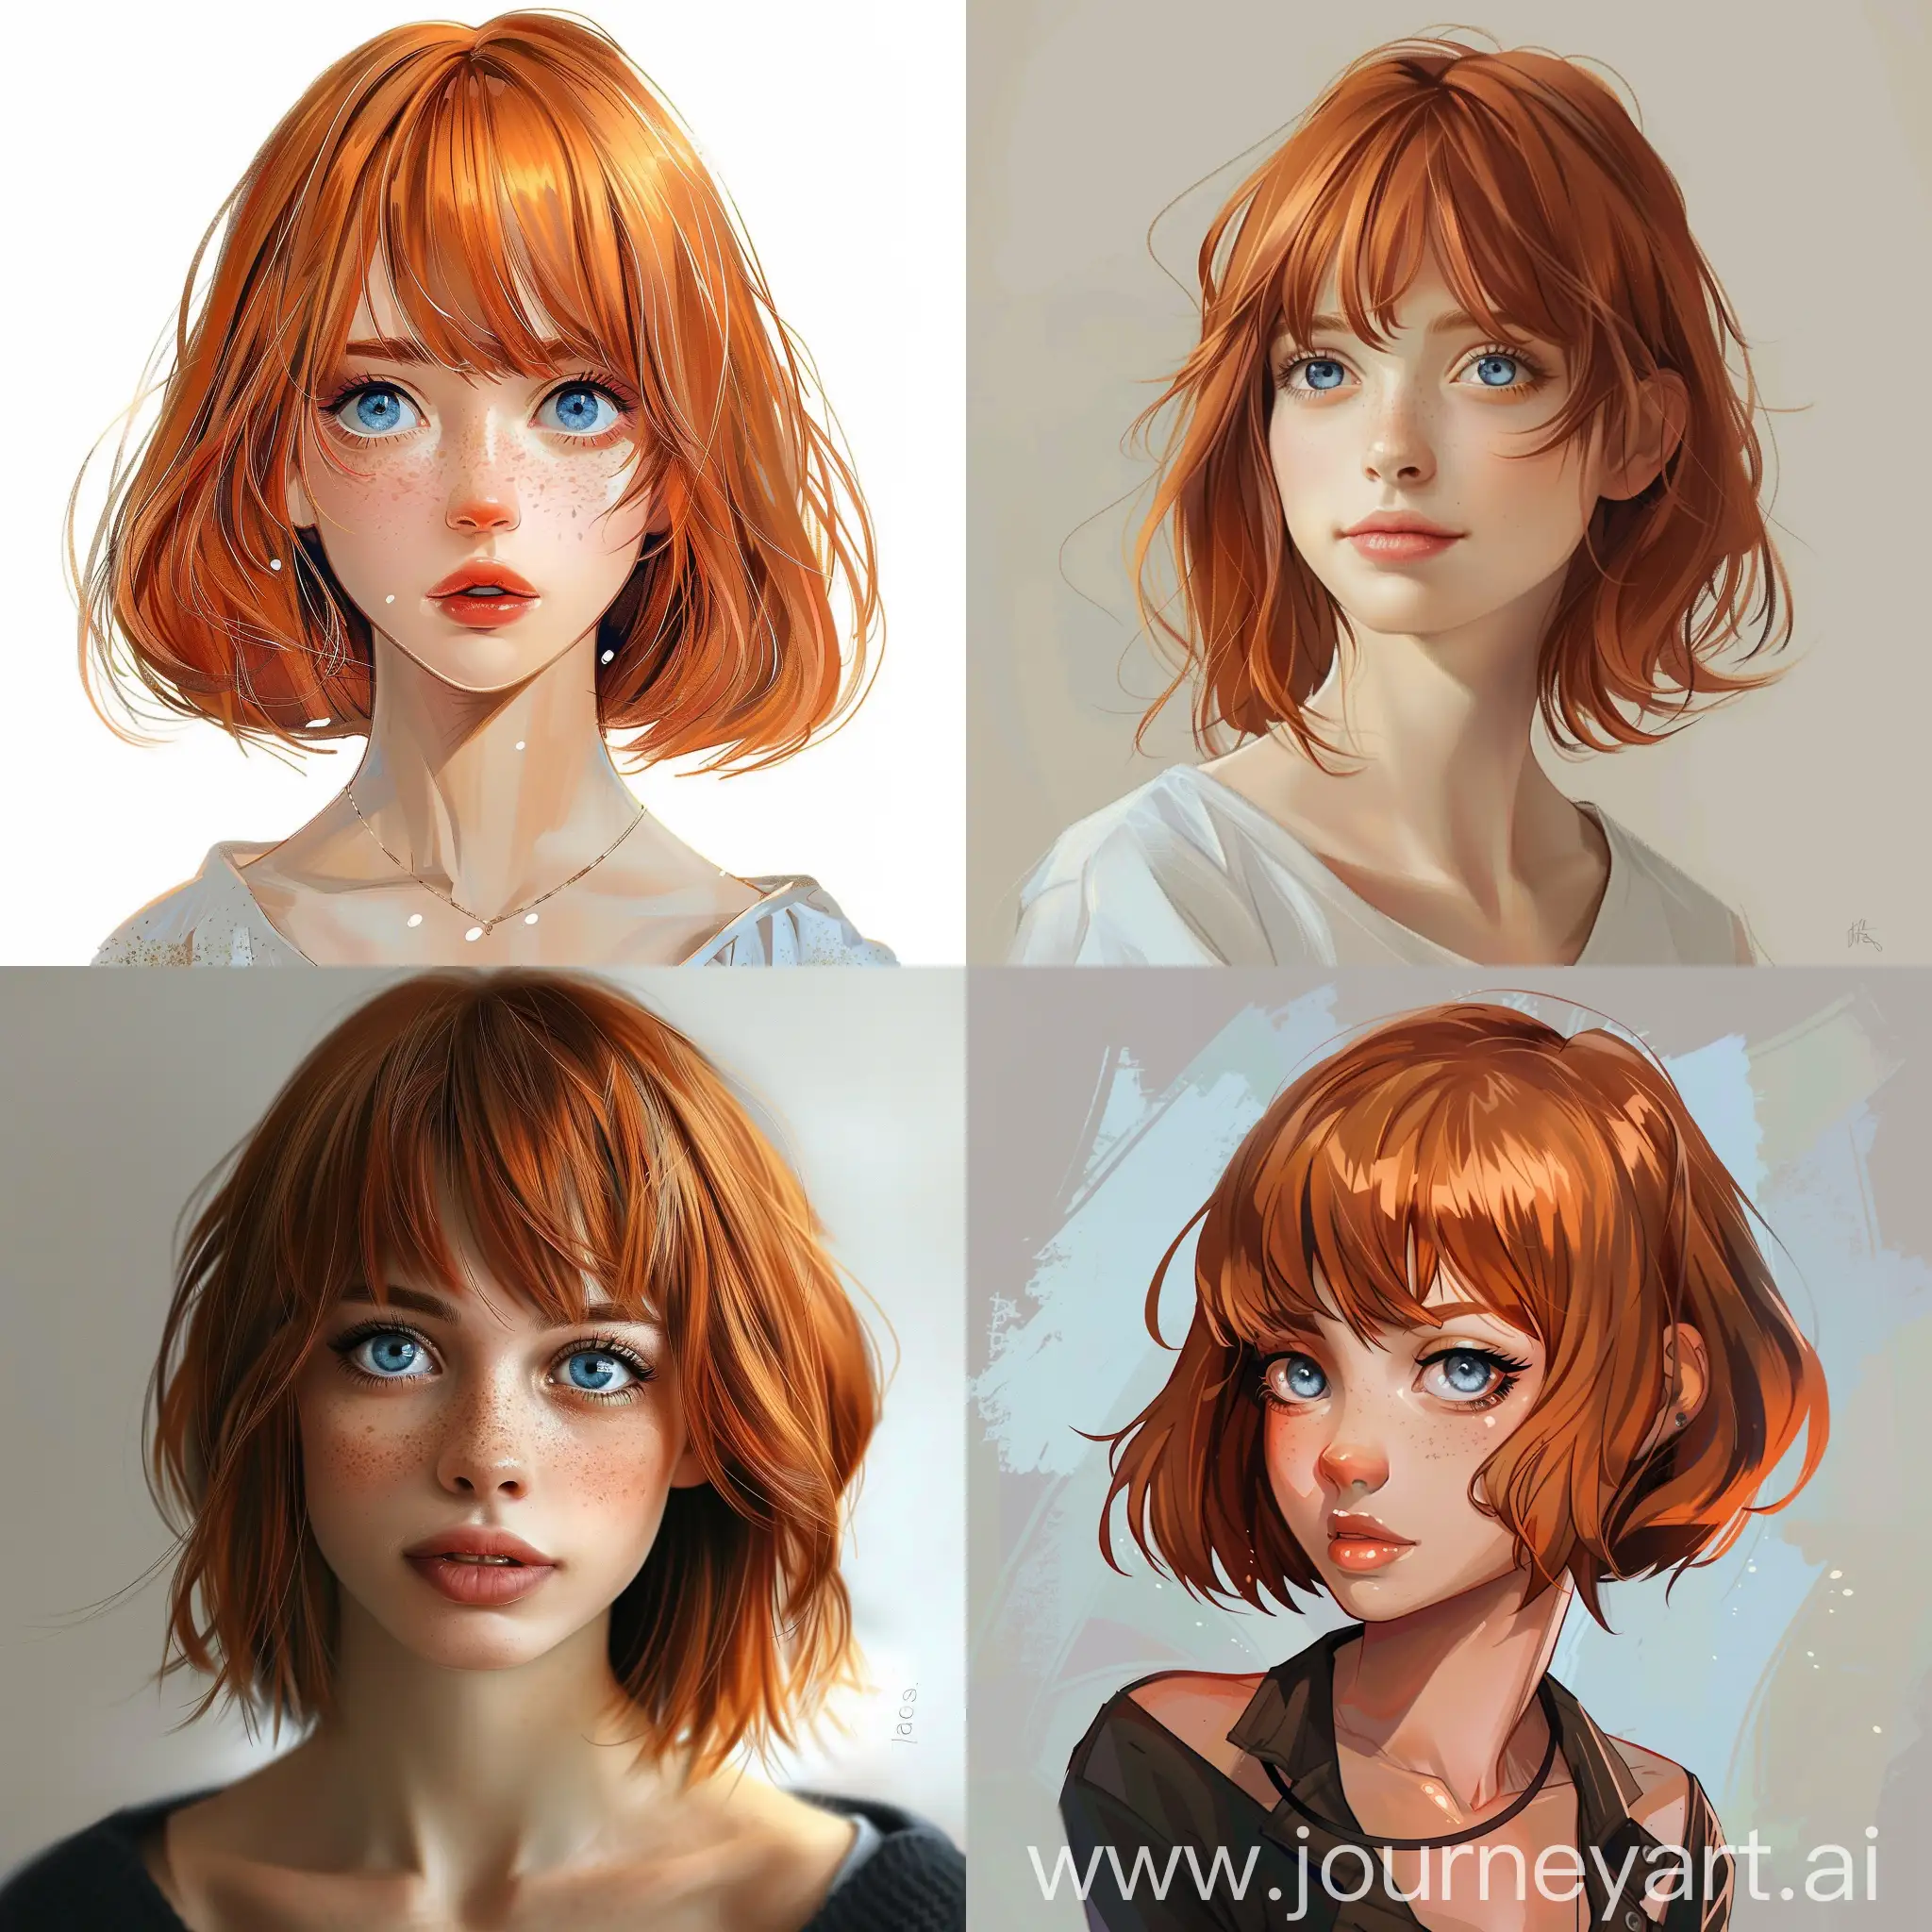 Captivating-Realistic-Portrait-ShortHaired-Redhead-Girl-with-Bangs-and-Blue-Eyes